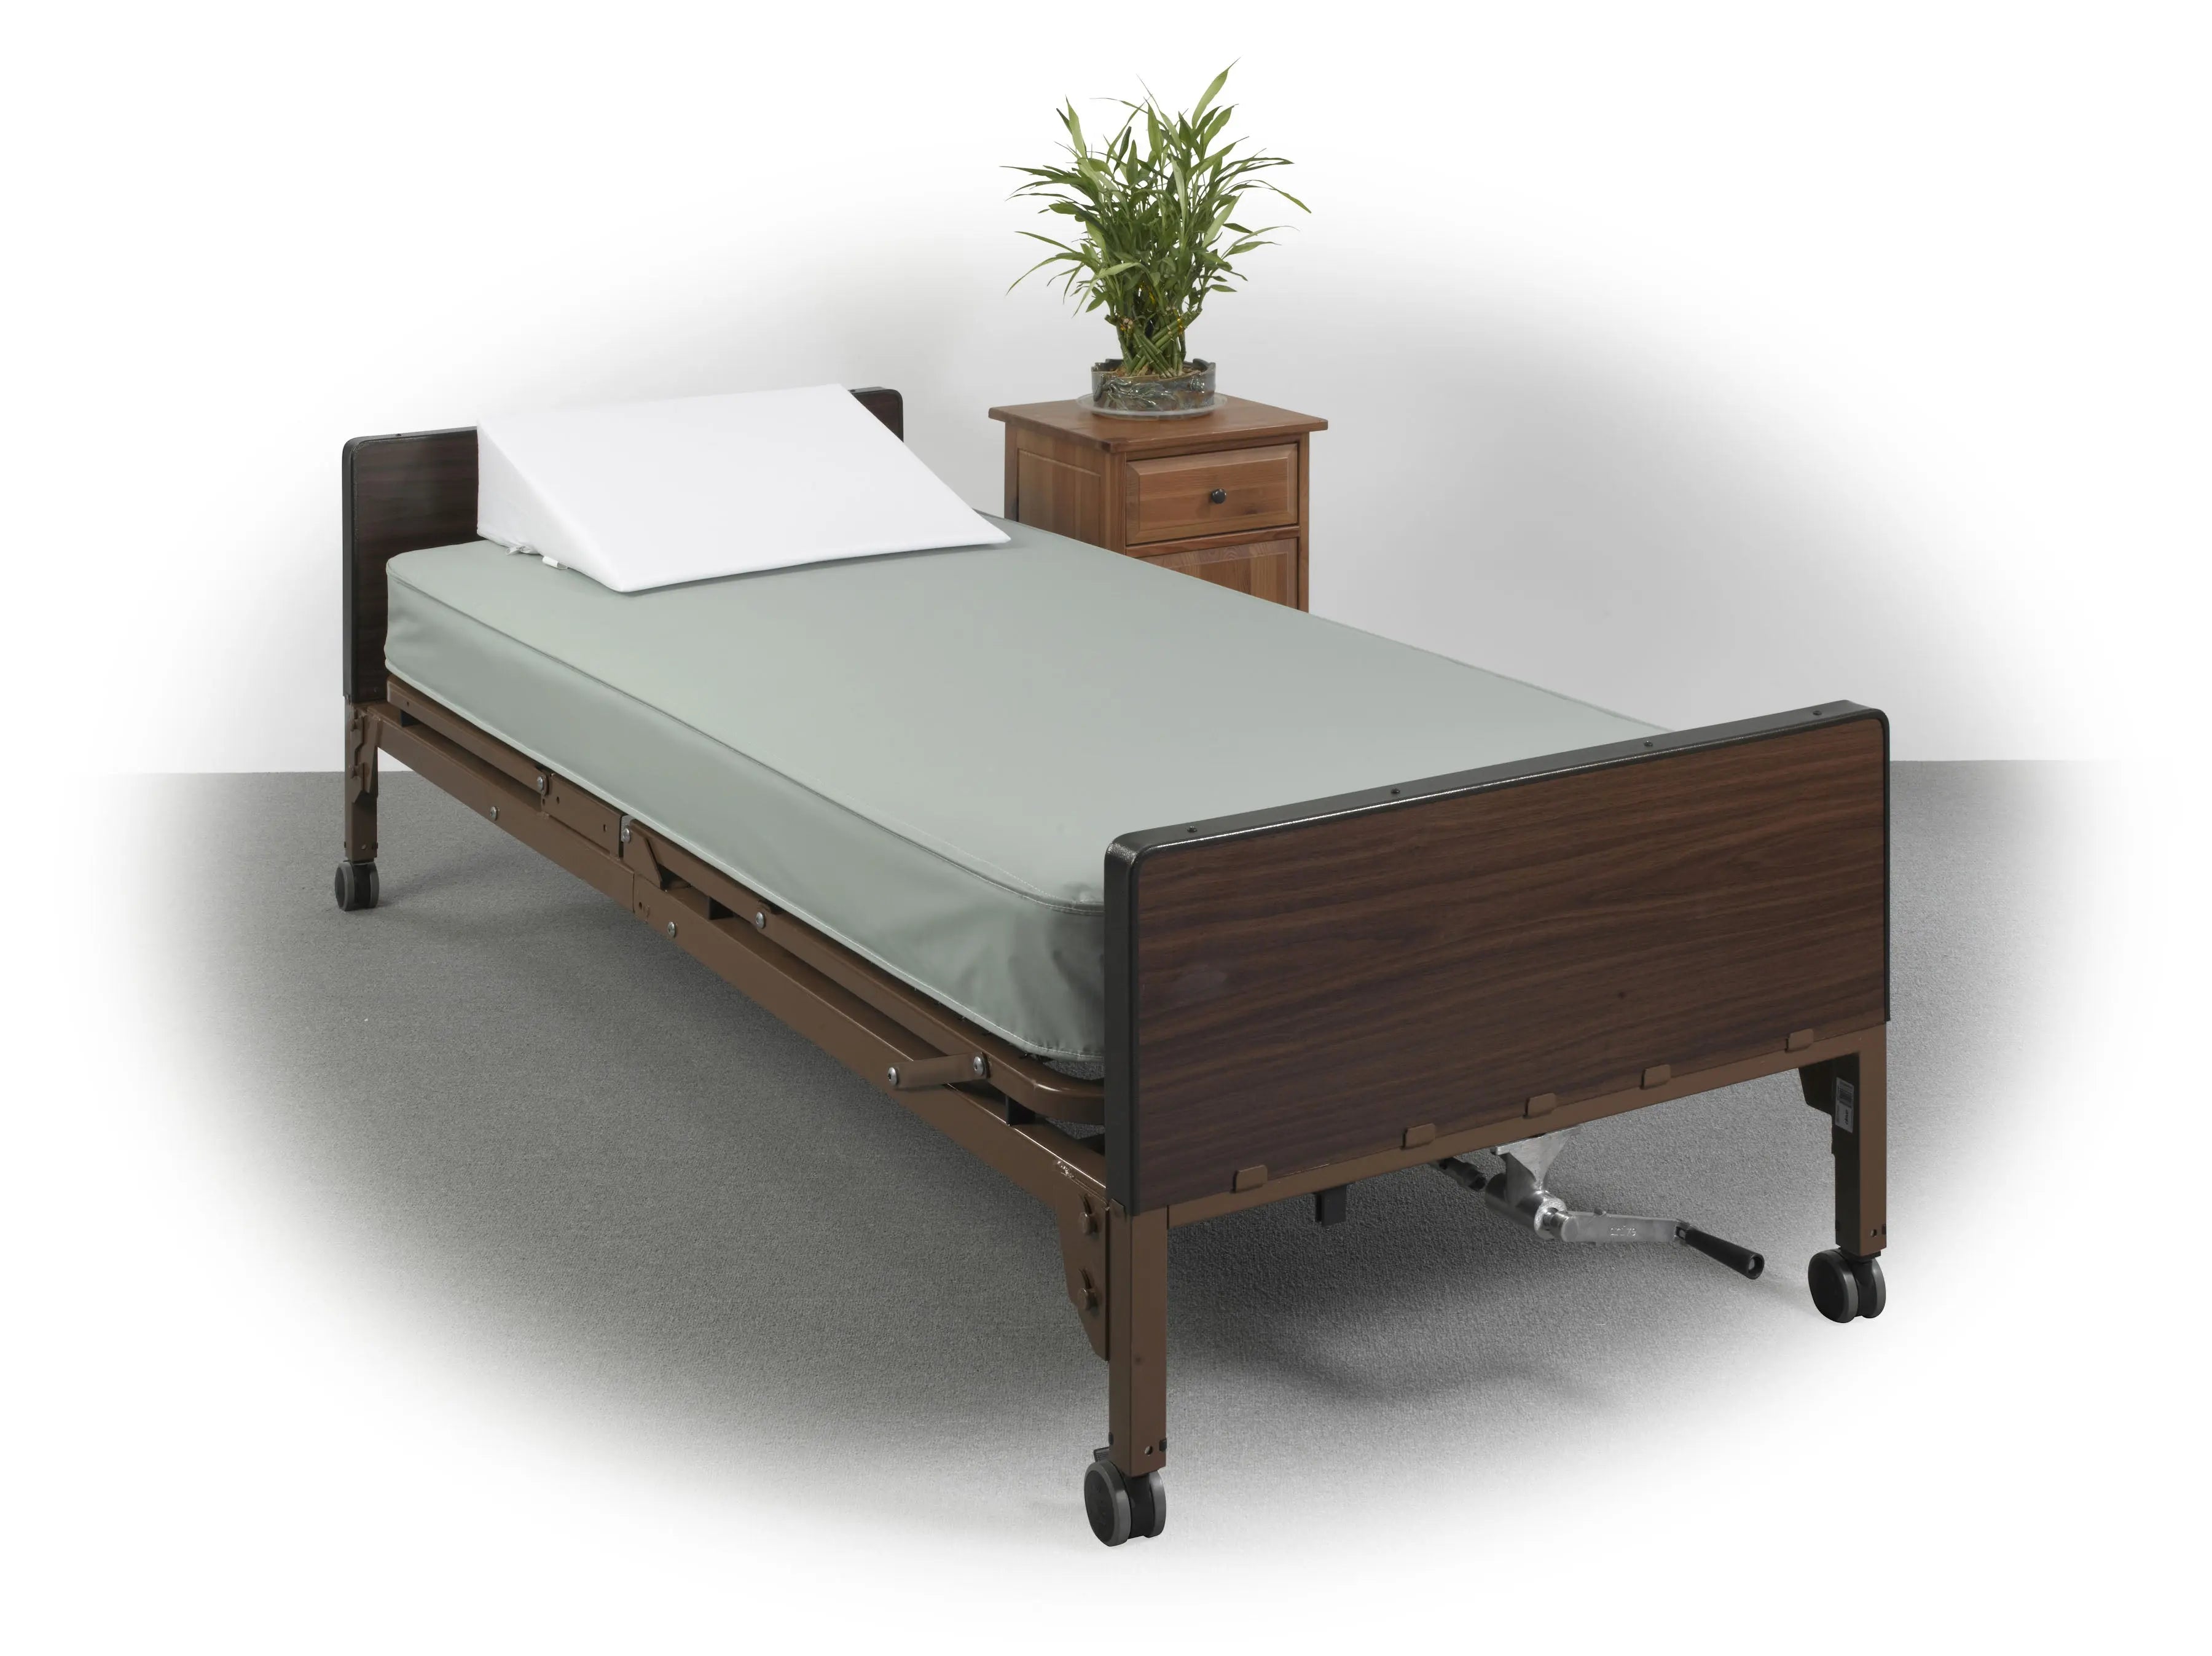 Bed Wedge - Home Health Store Inc